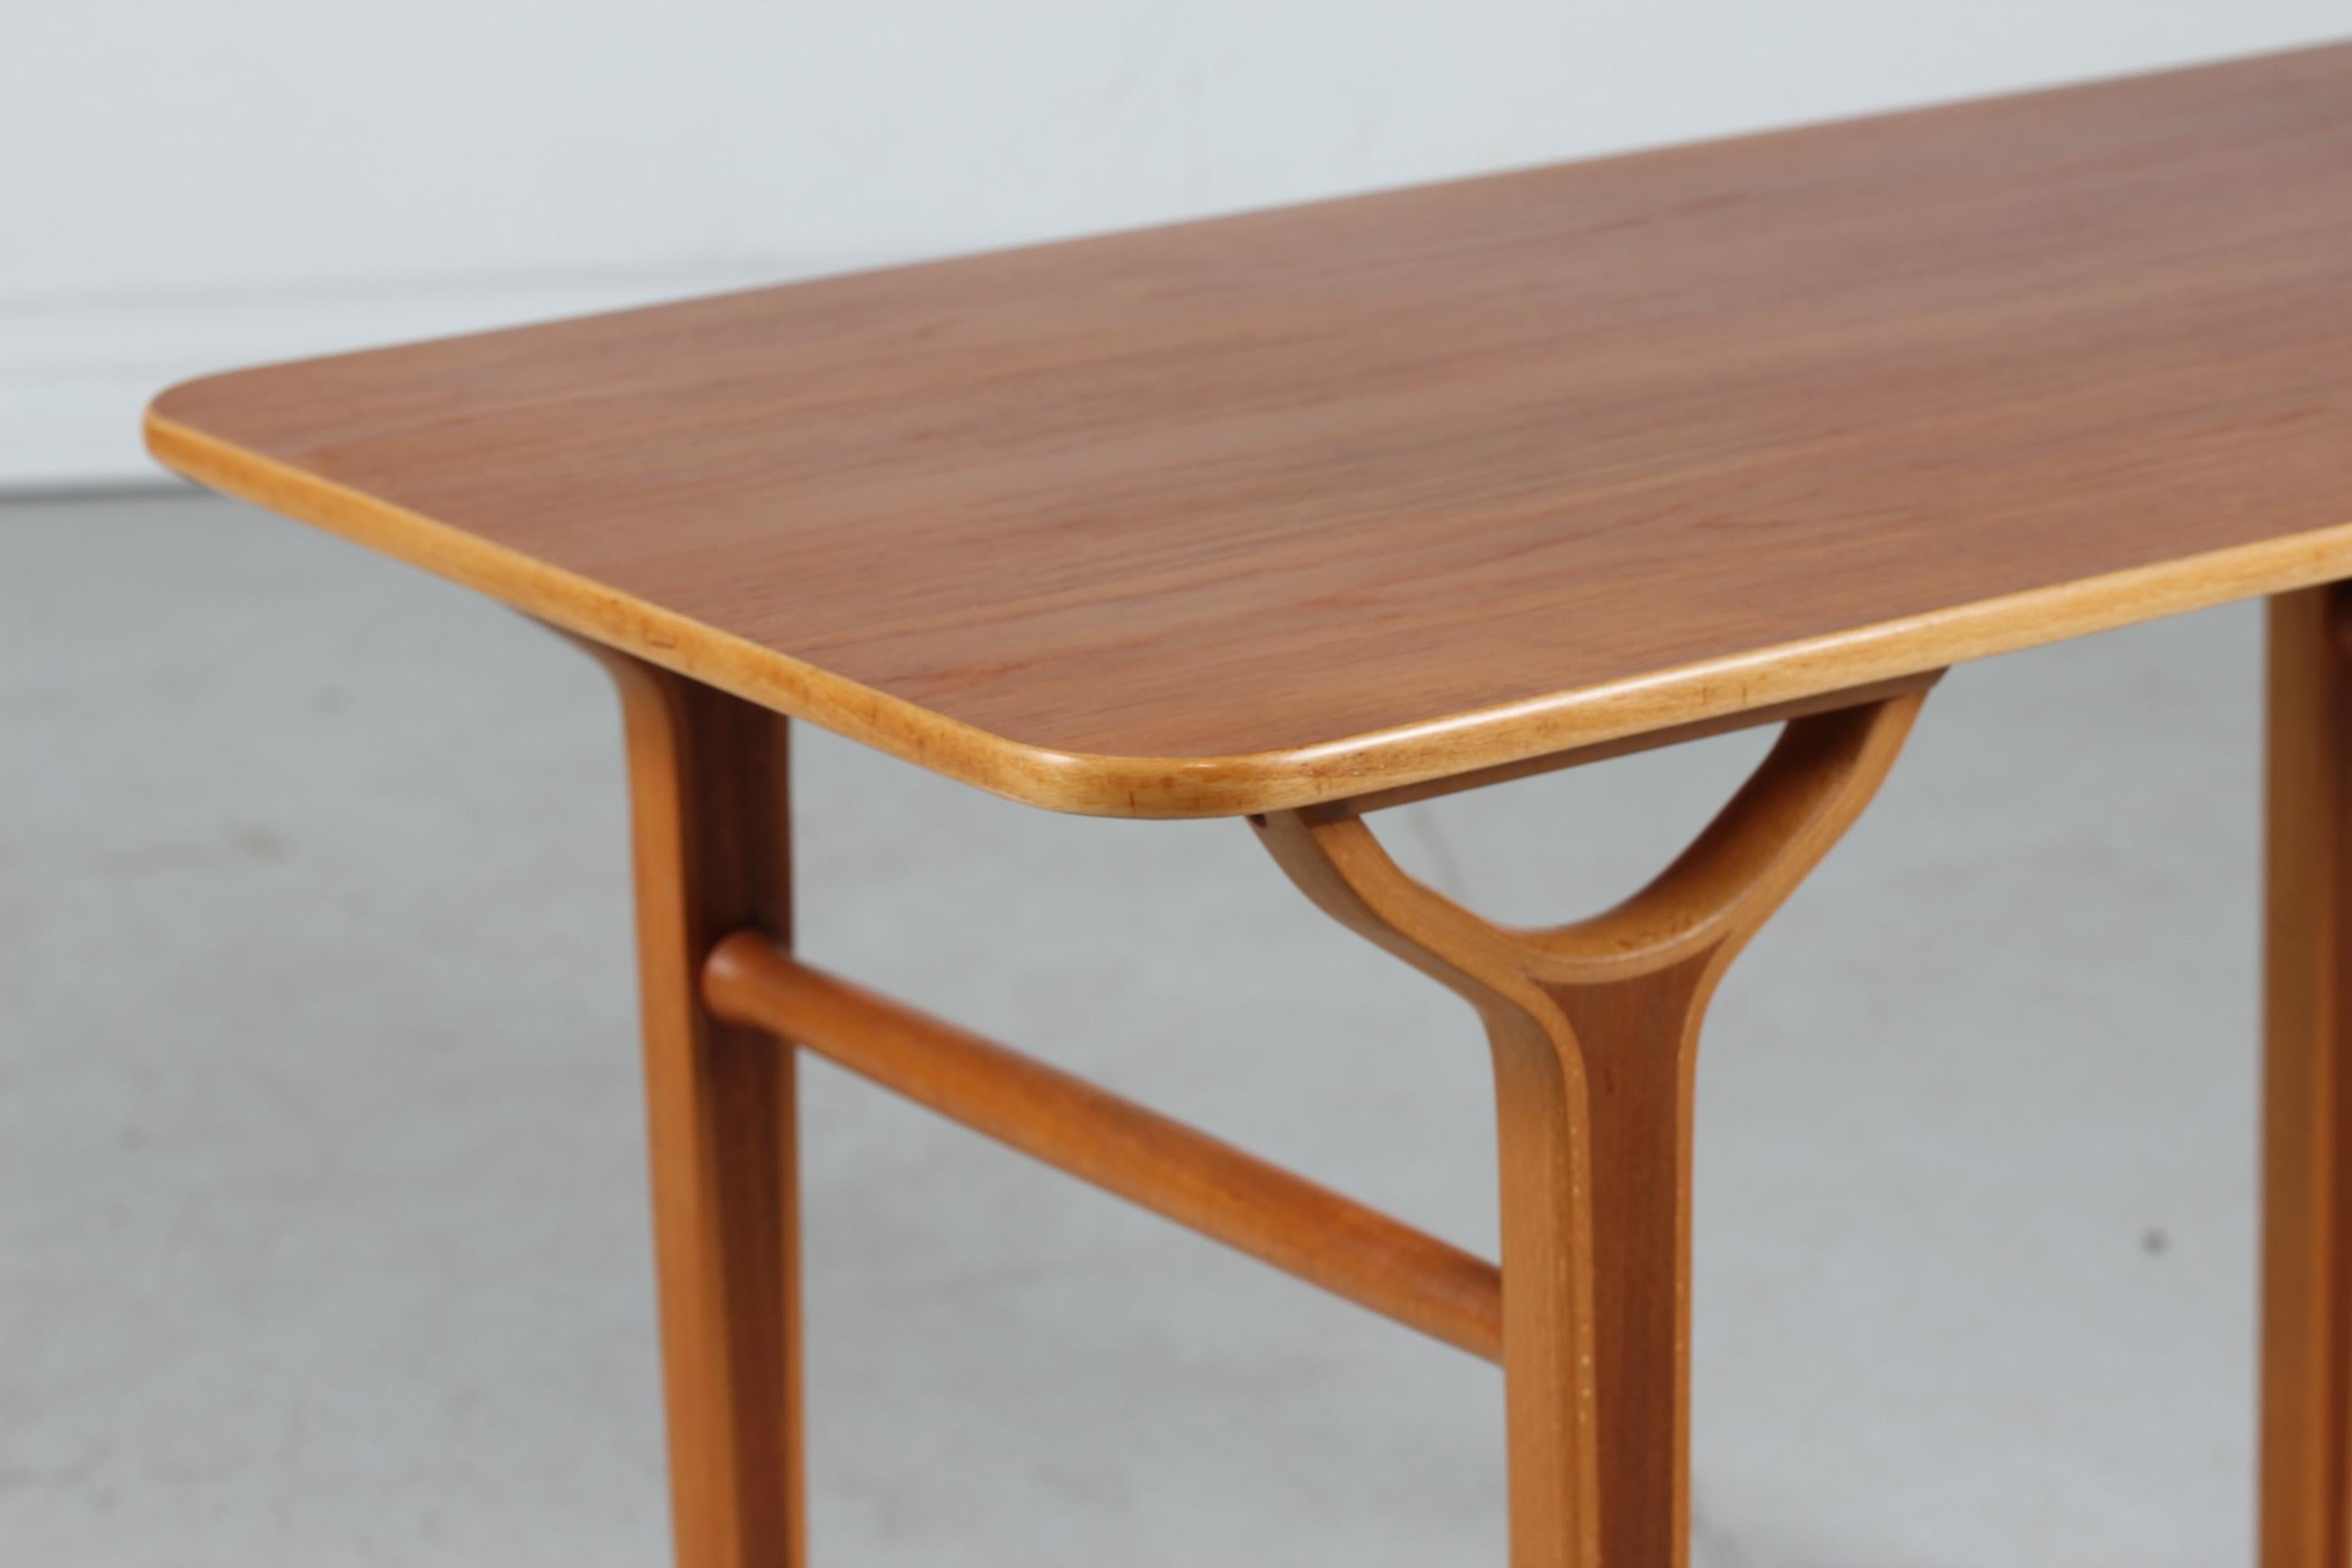 Vintage AX coffee table by the Danish architects Peter Hvidt & Orla Mølgaard.

The table is made in the 1950s of teak with inlaid beech wood and remains in very nice vintage condition without damage.

Manufactured by Fritz Hansen A/S.

